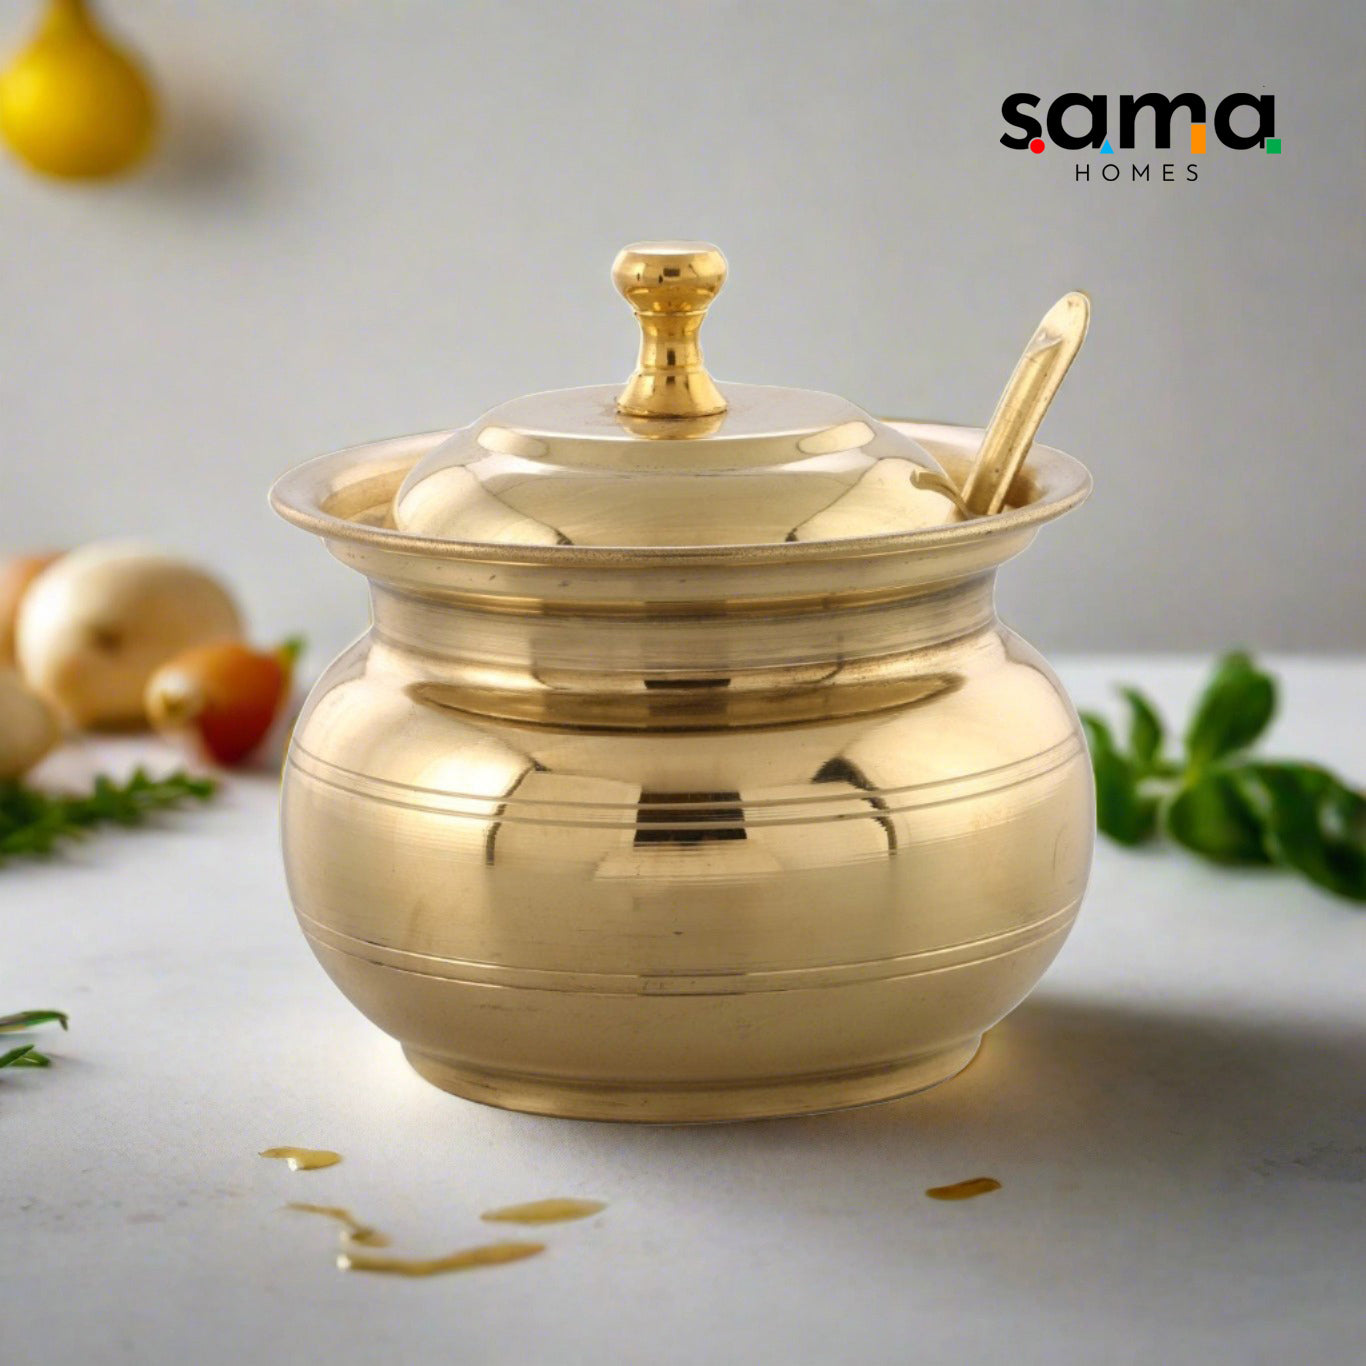 Sama Homes - Brass Ghee Pot With Lid and a Spoon